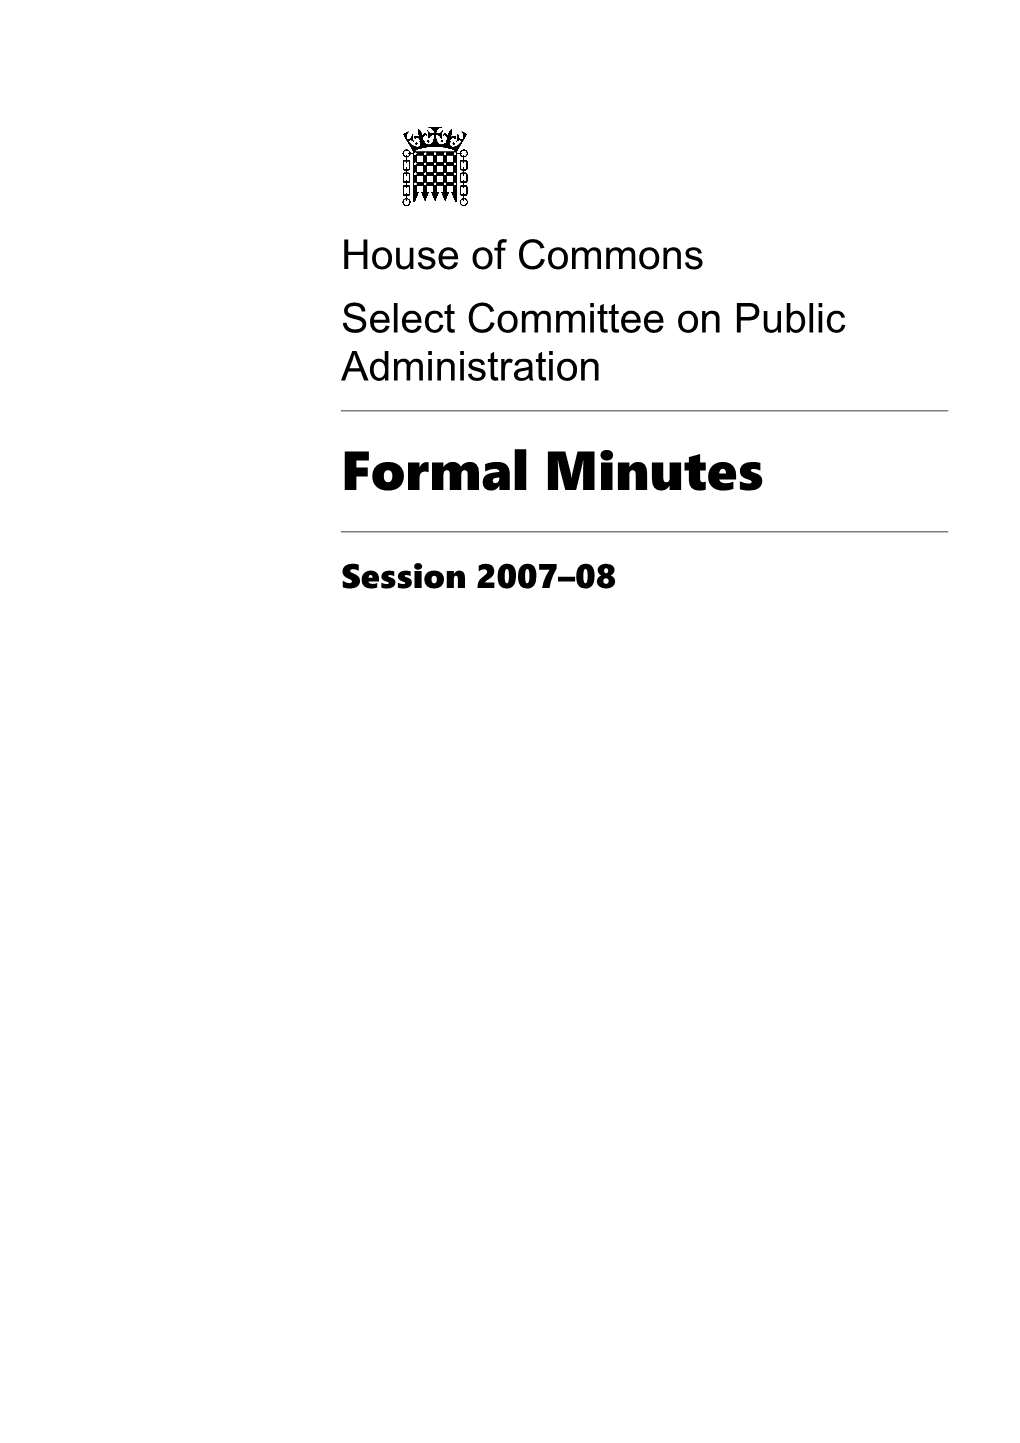 Select Committee on Public Administration